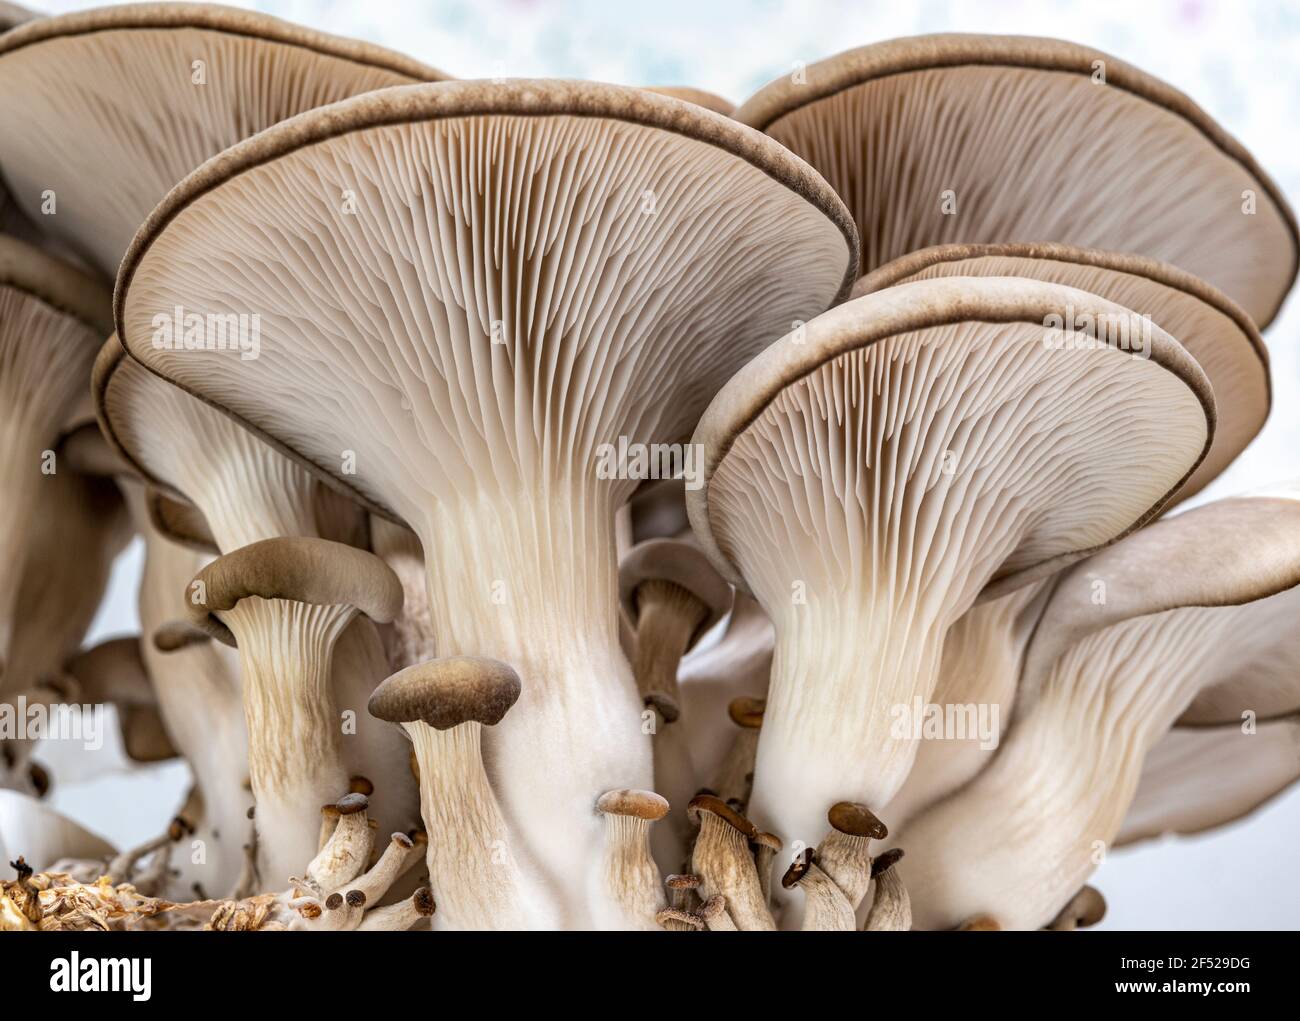 oyster mushrooms growing Stock Photo